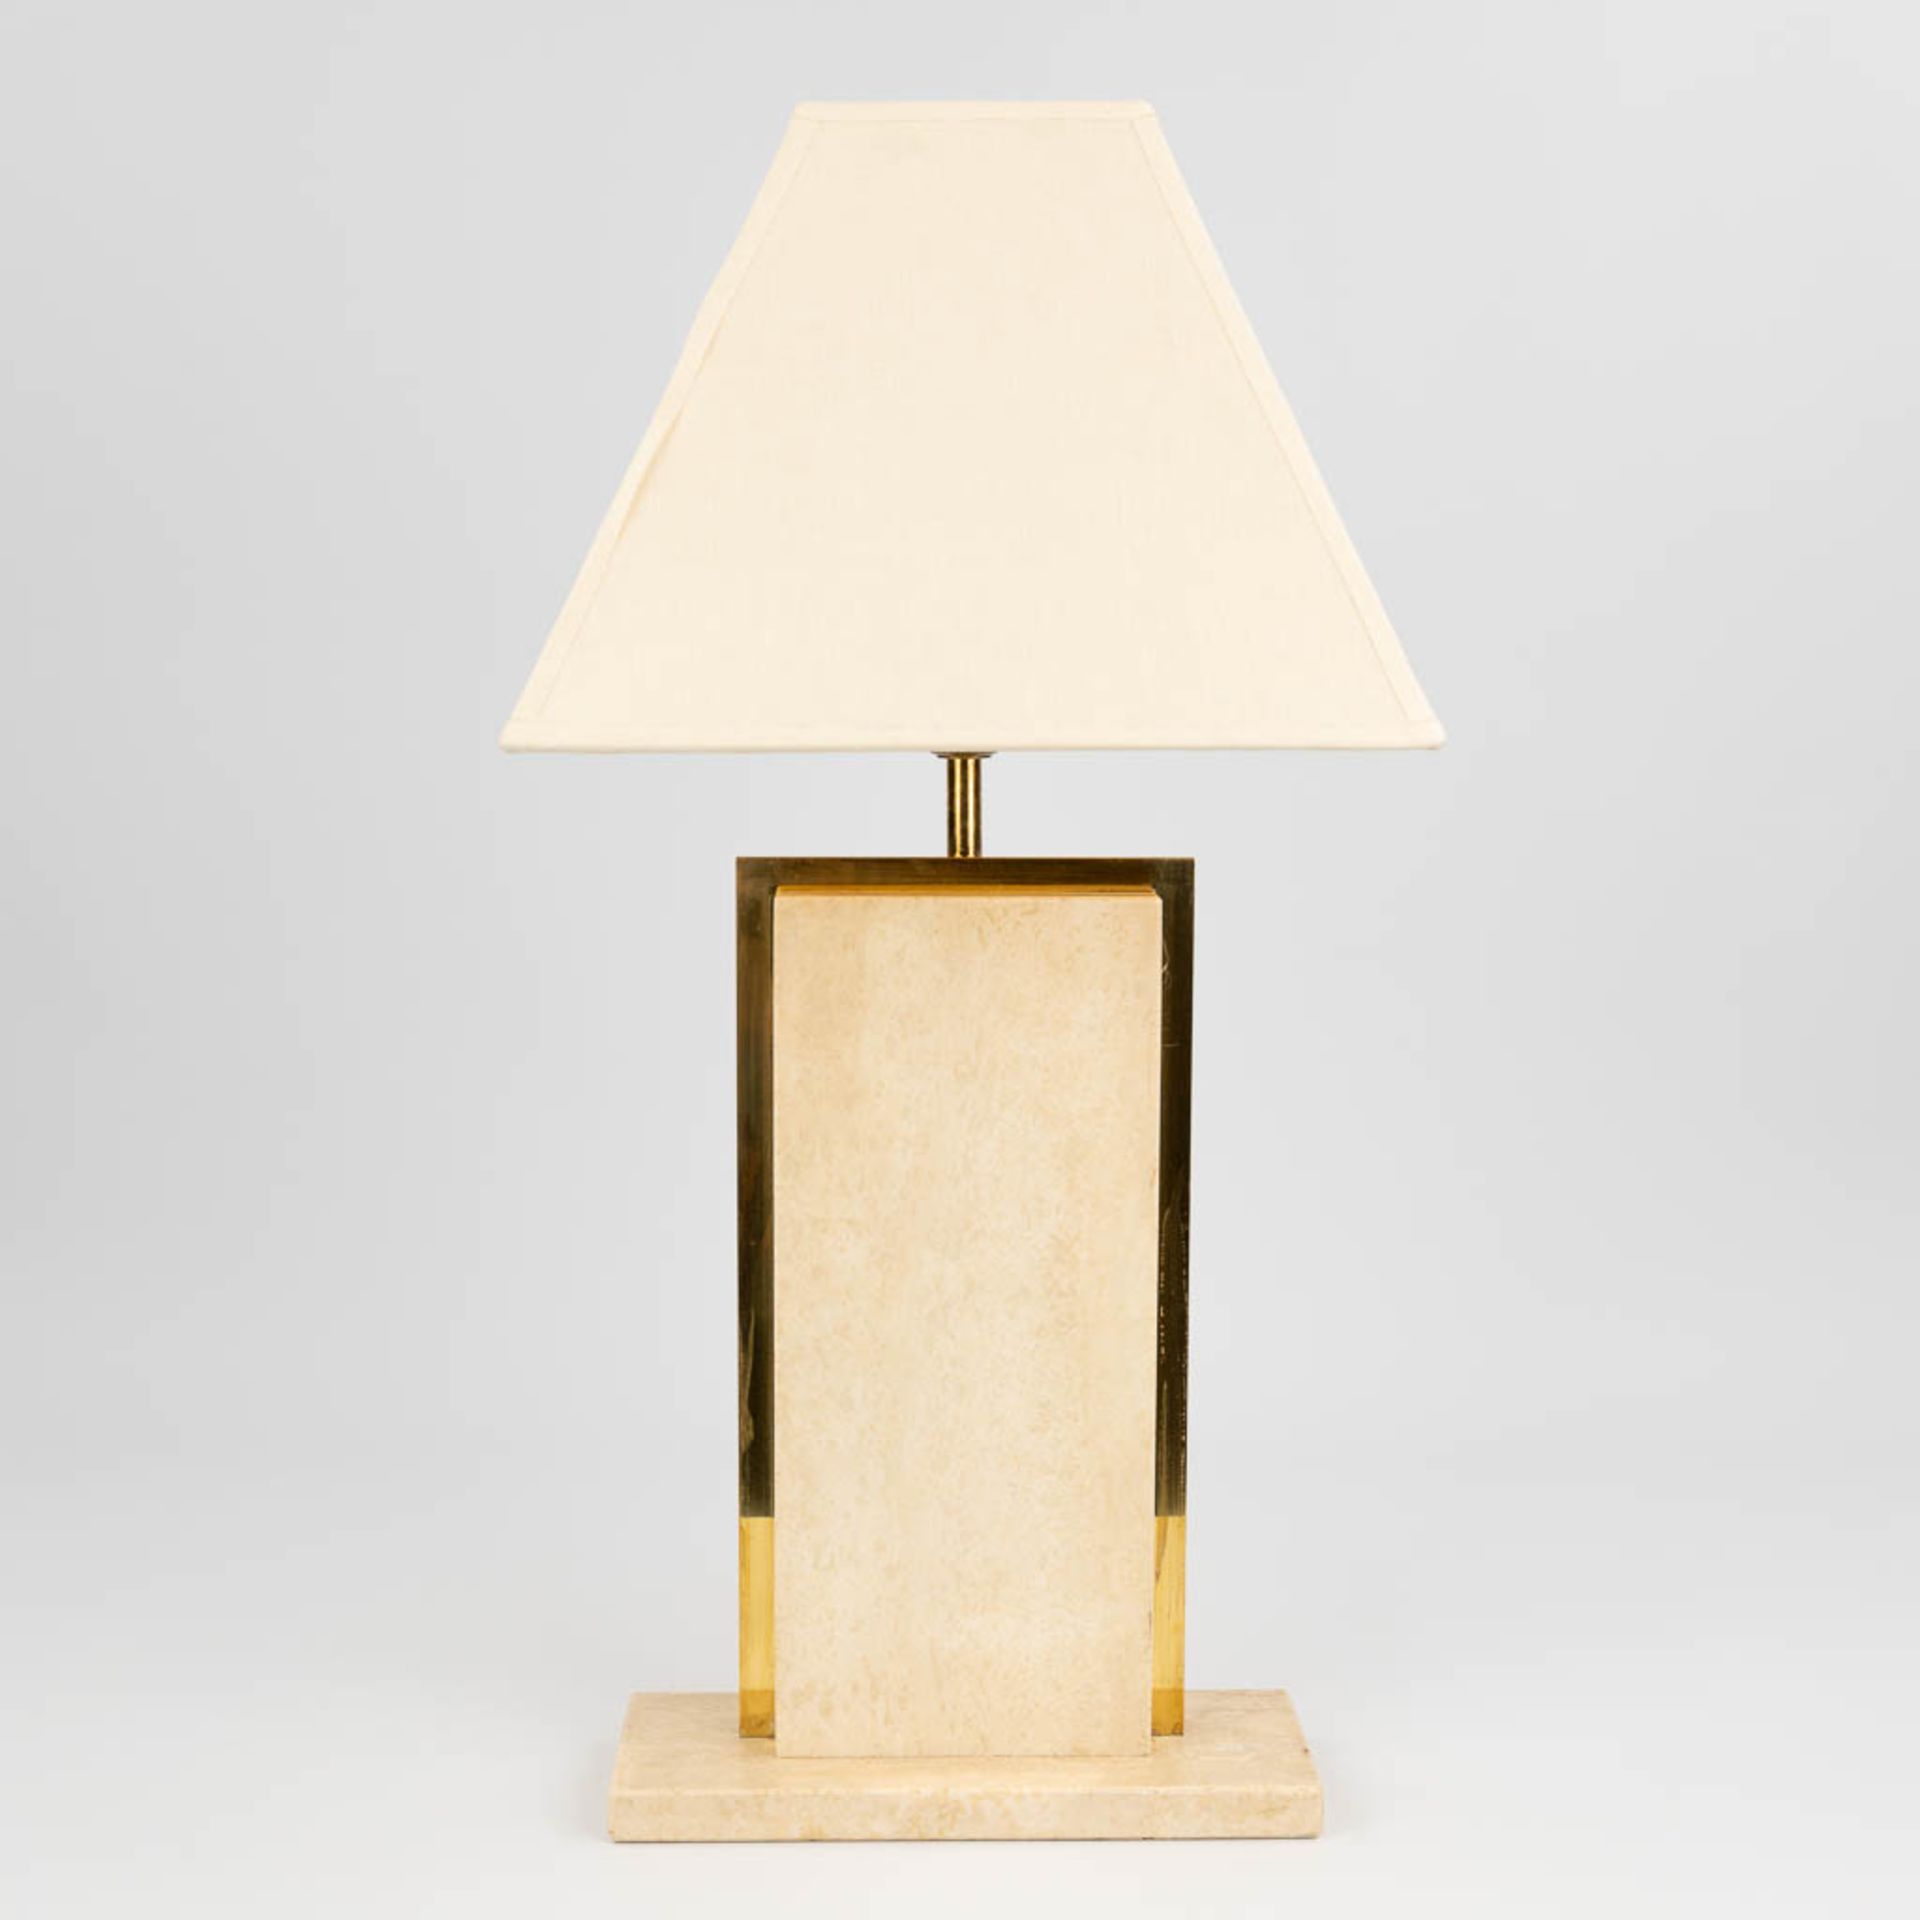 Camille BREESCHE (XX) a travertine table lamp with gold-plated metal parts. (10 x 26 x 44cm)